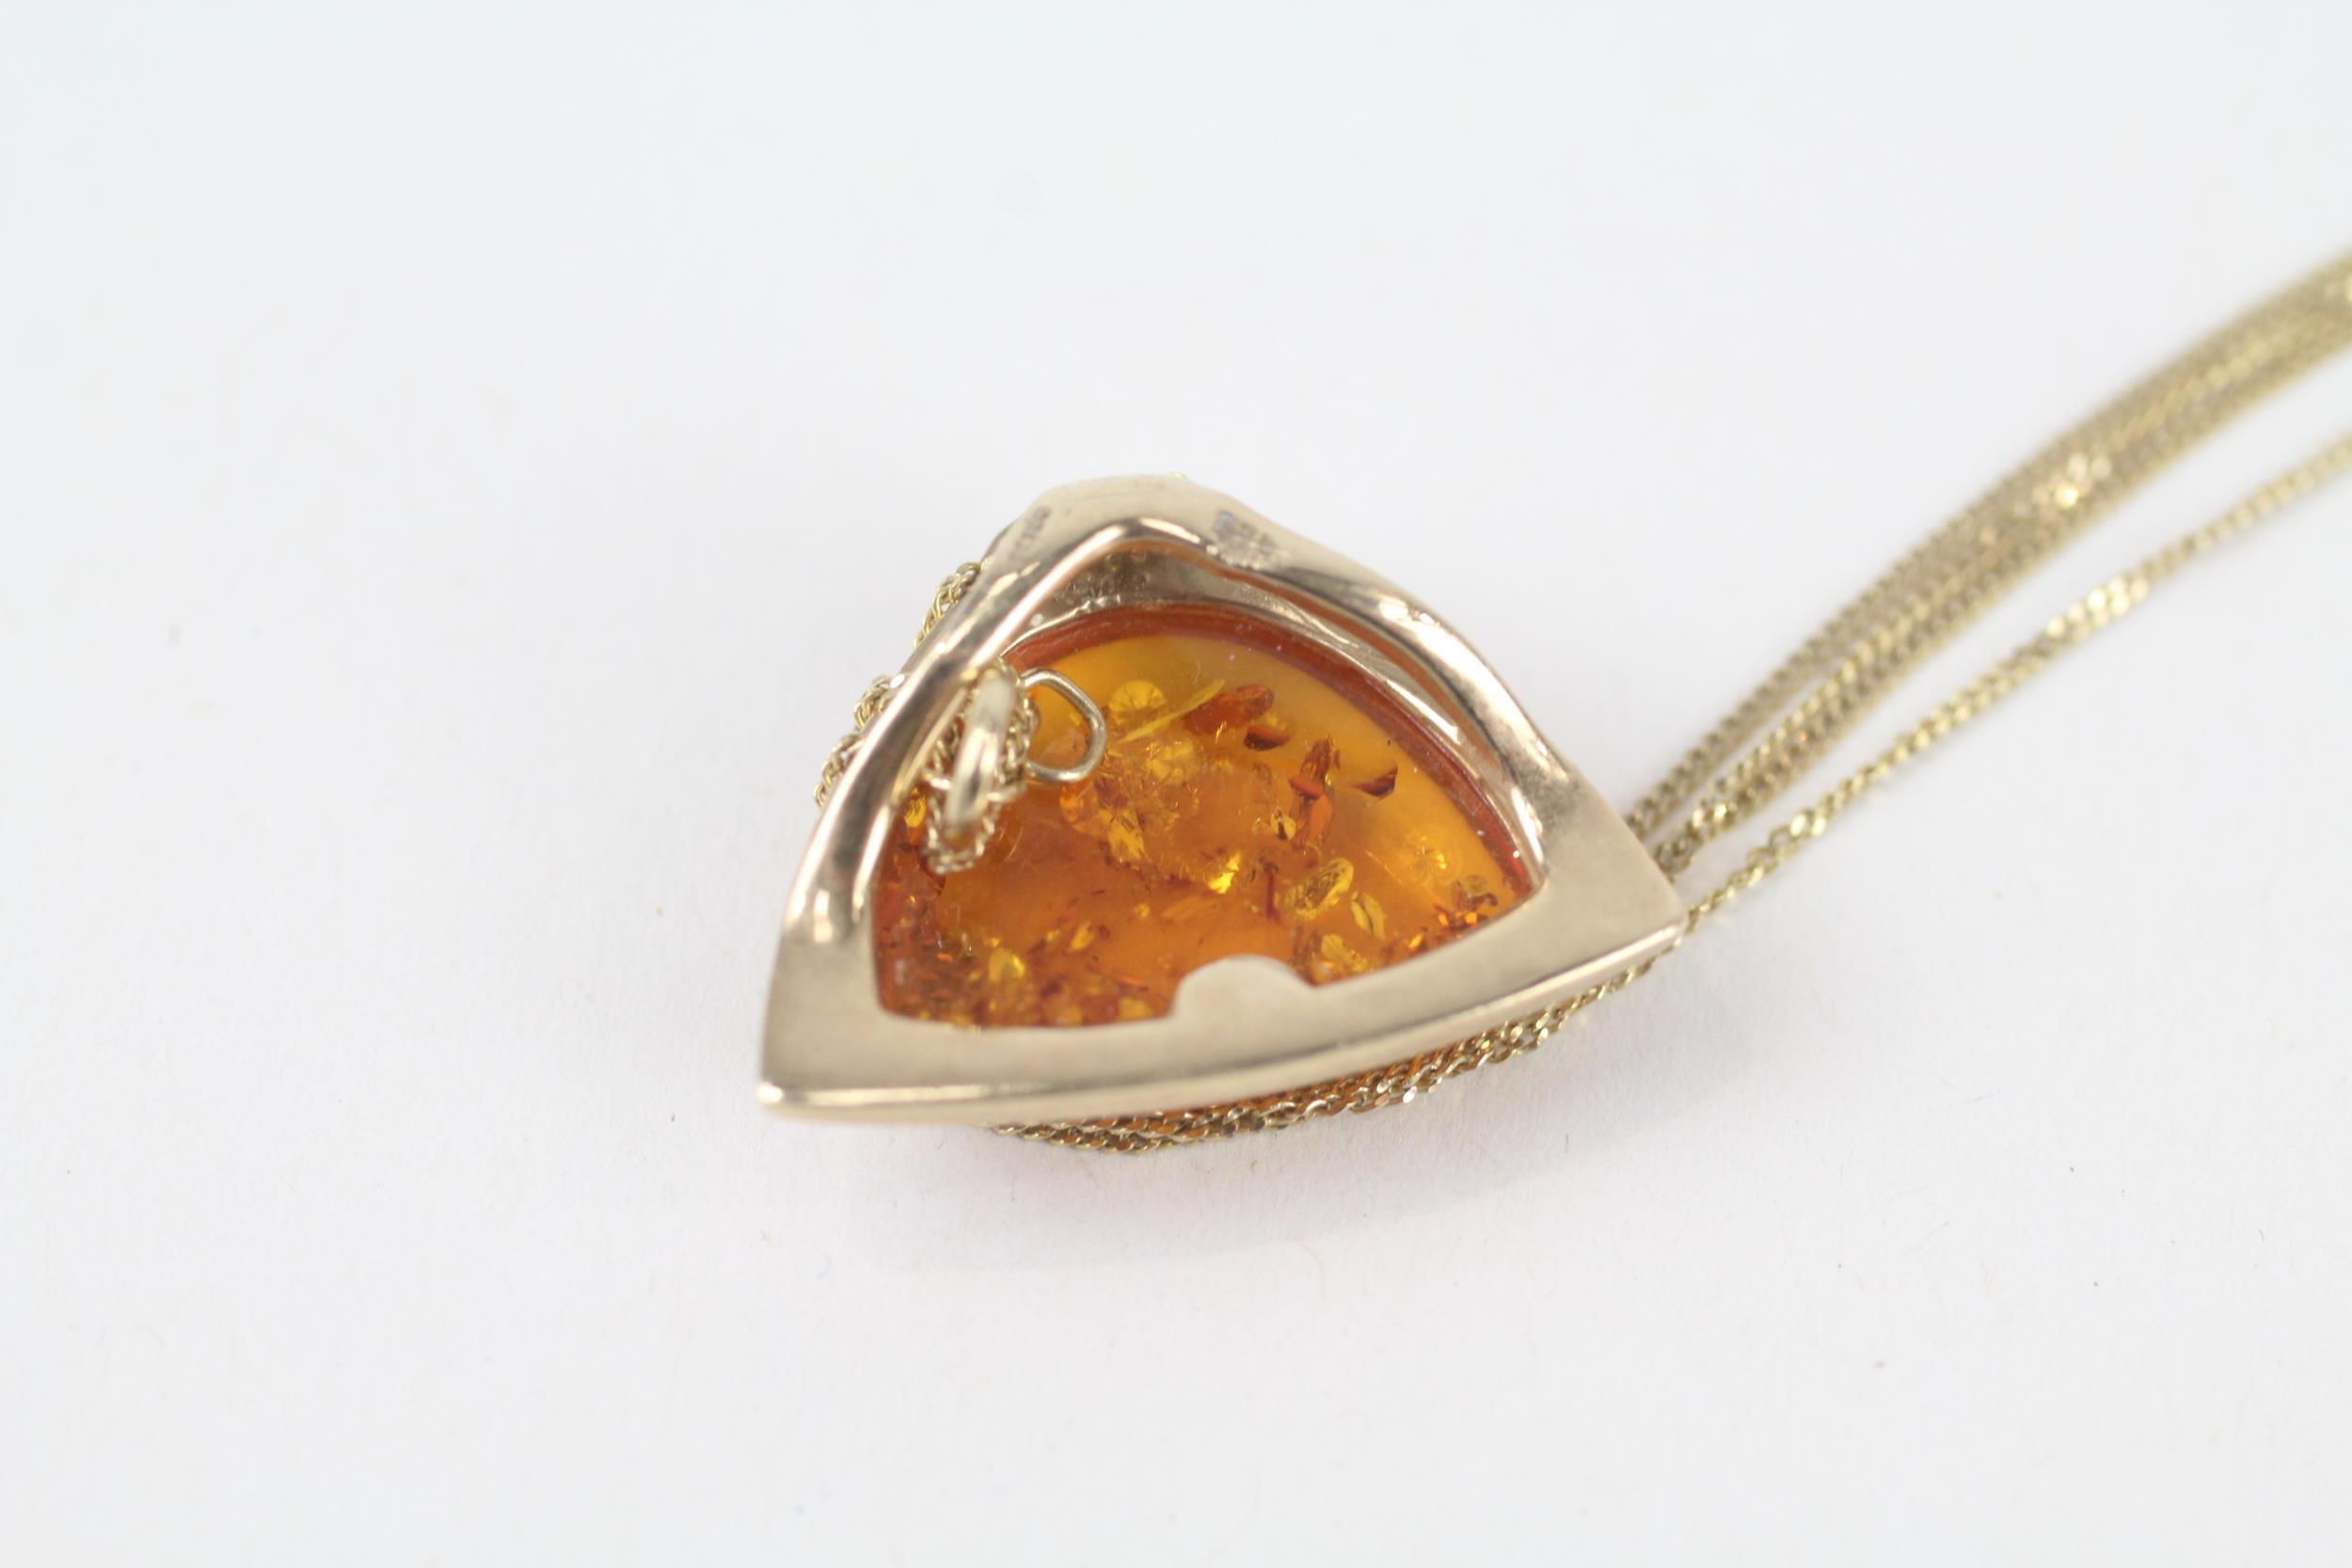 9ct gold amber pendant necklace - Image 4 of 4